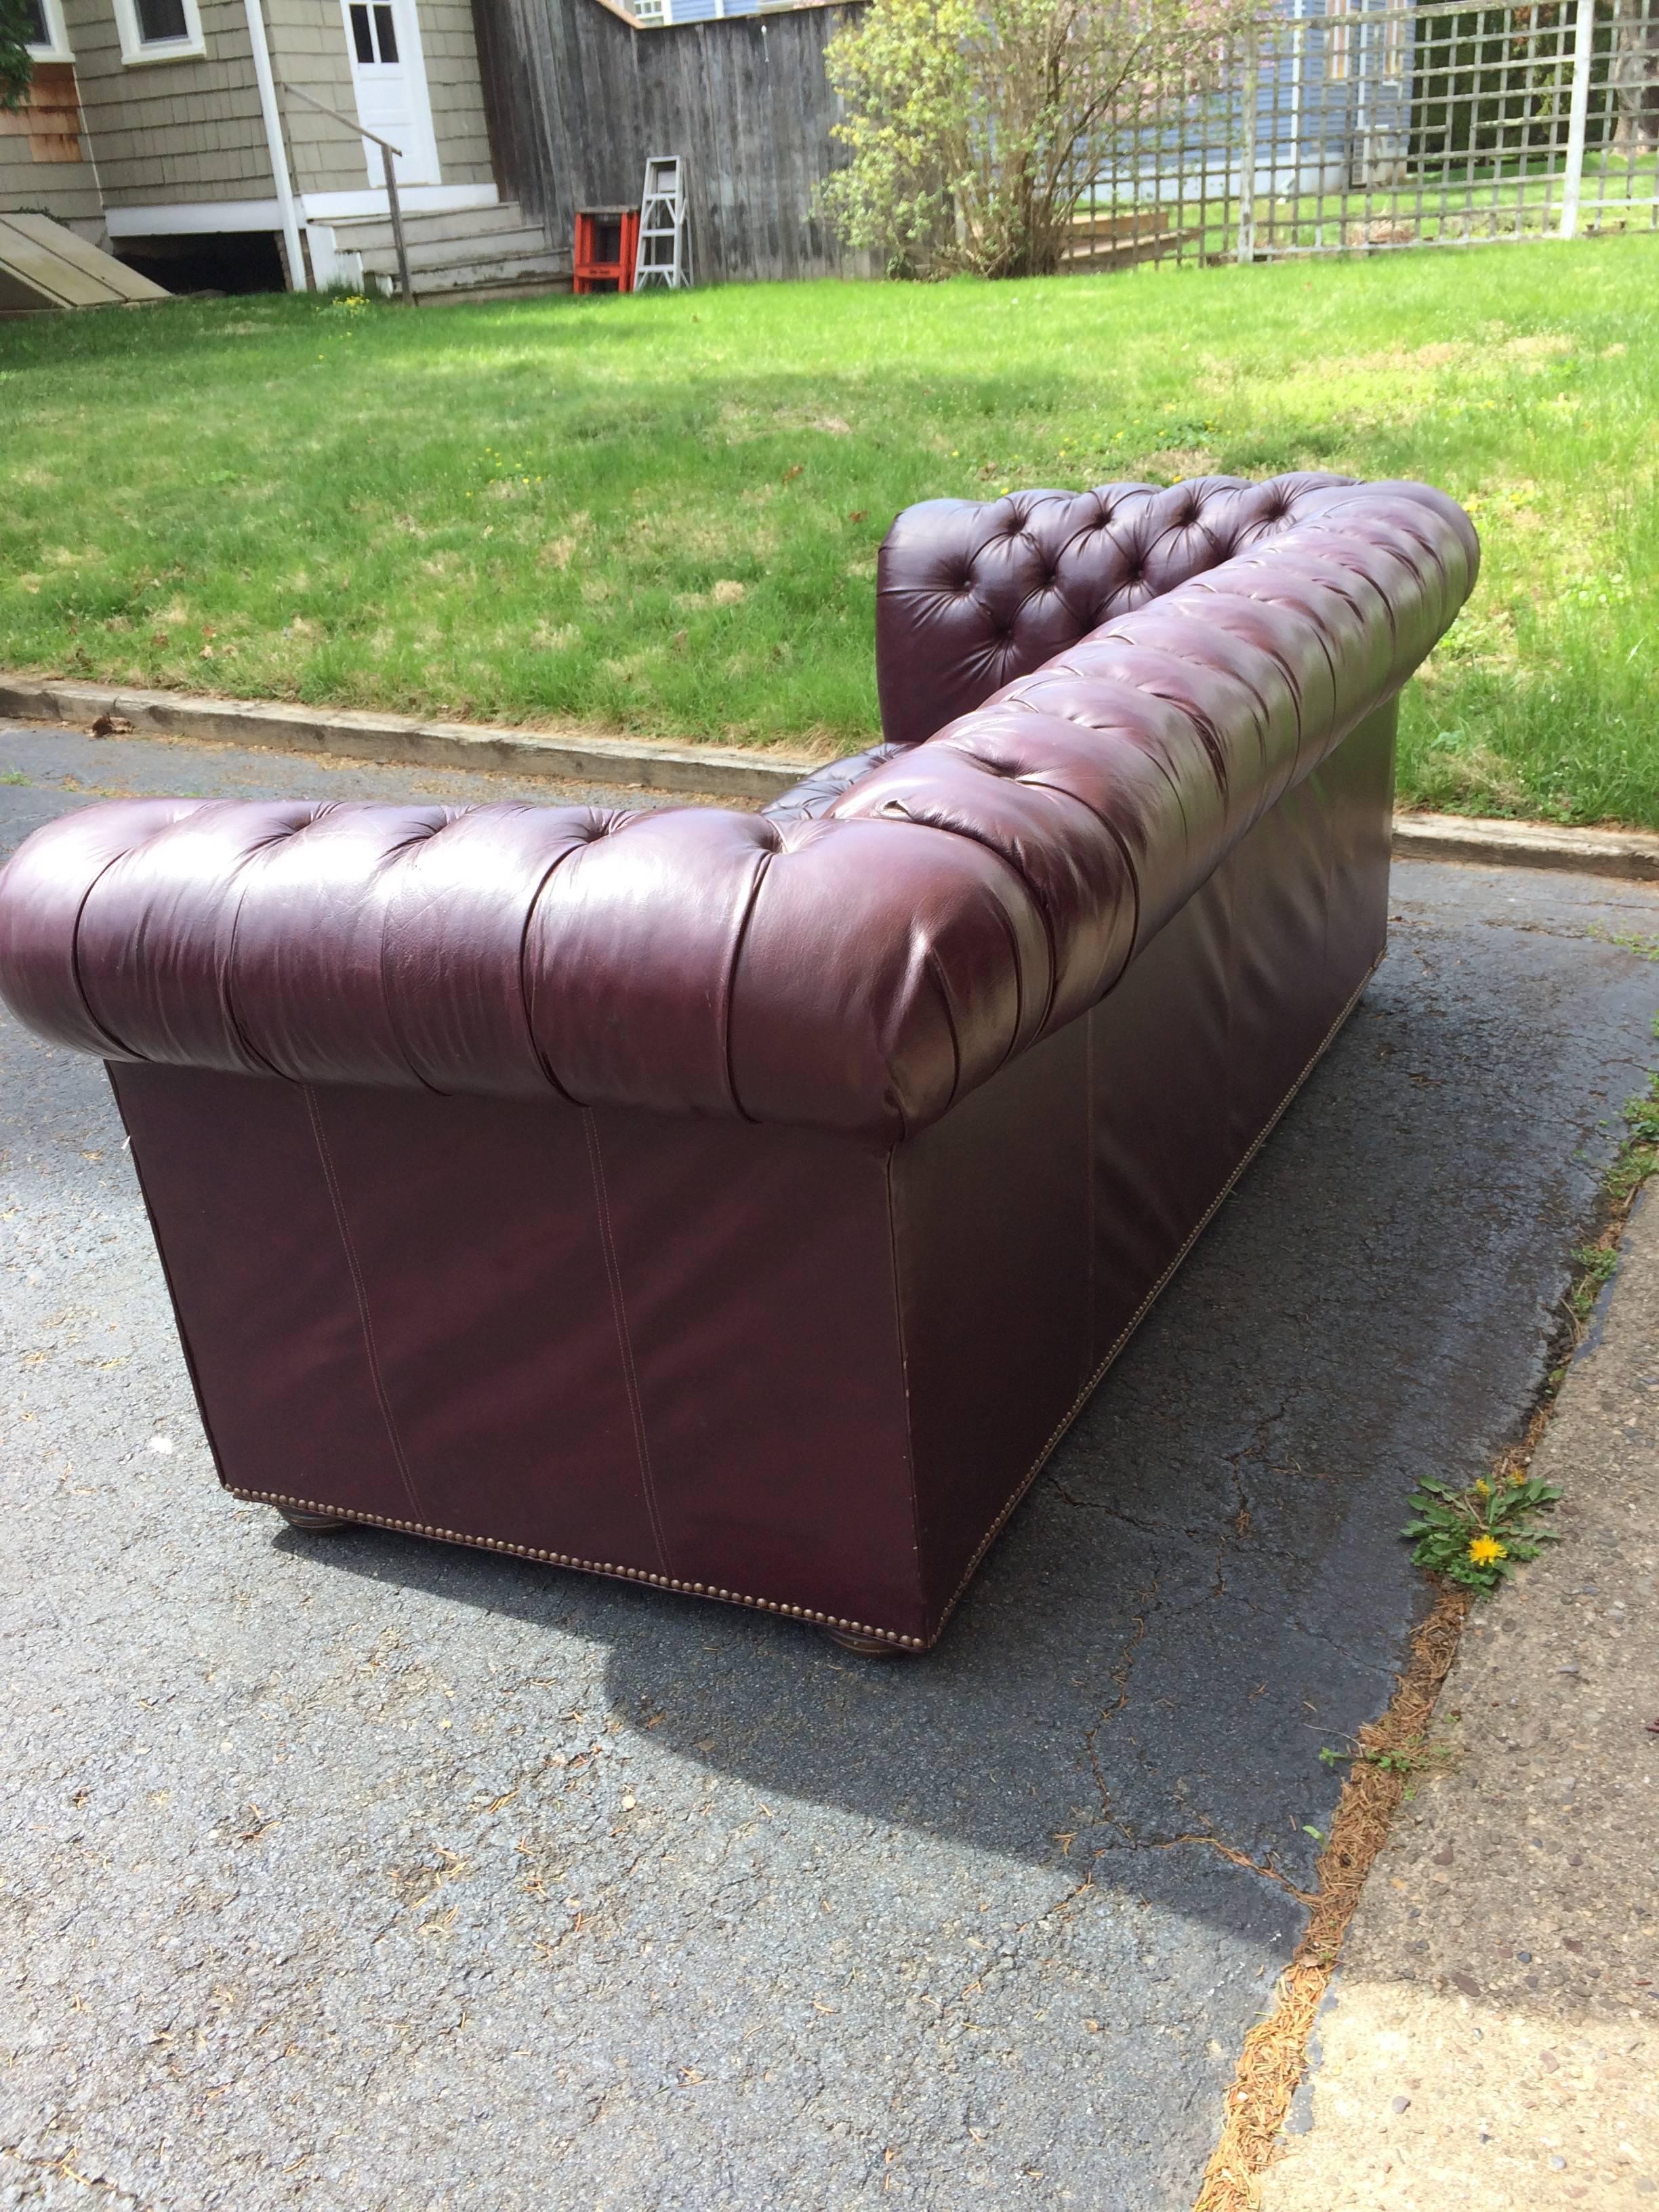 American Rich Eggplant Leather Vintage Tufted Chesterfield Sofa